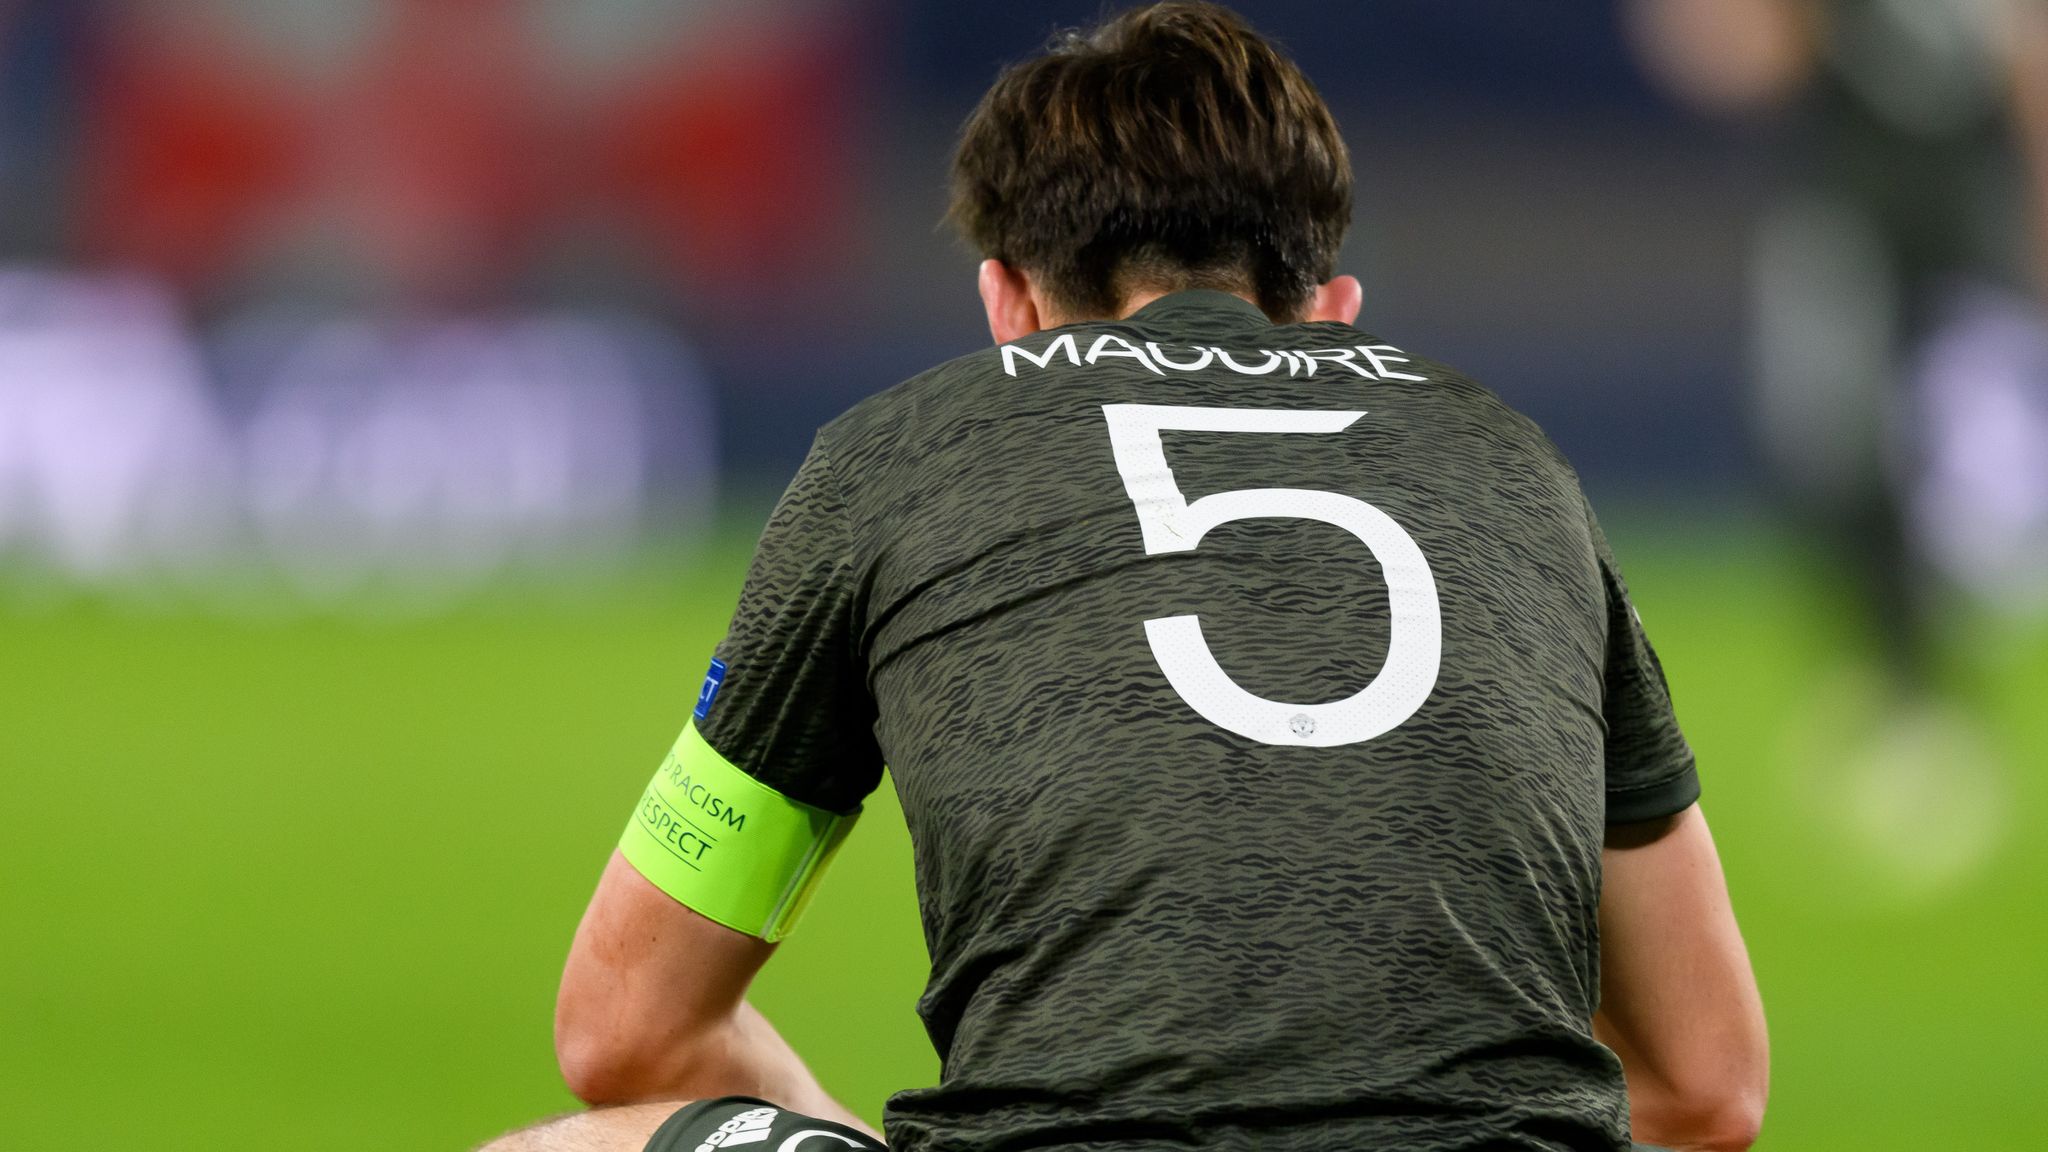 Wes Brown urges out-of-favour Manchester United ace Harry Maguire to keep fighting.